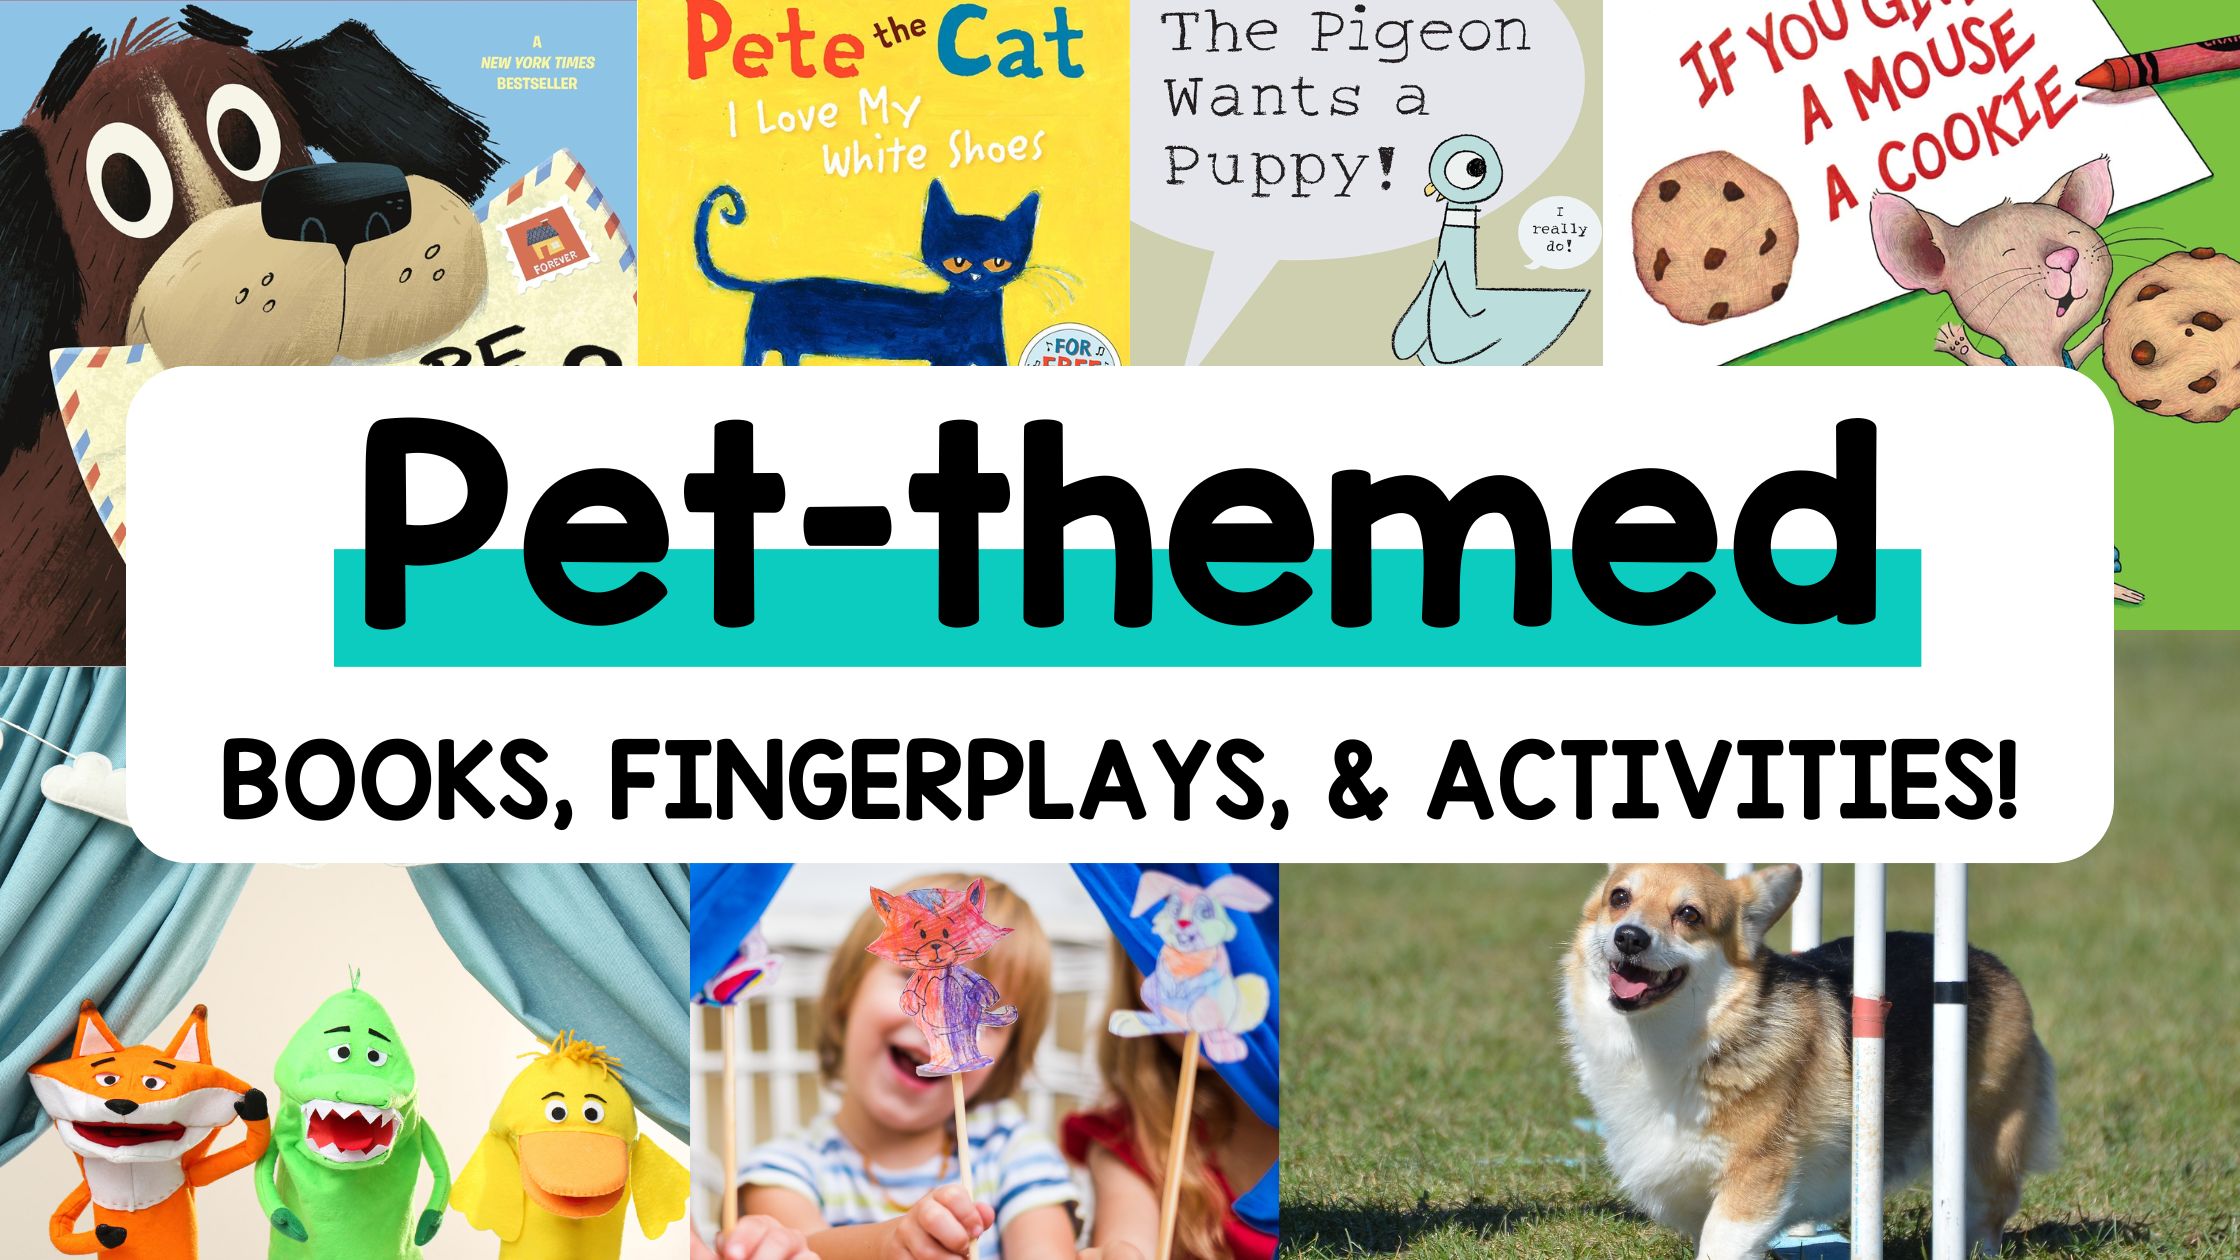 Best Pet-themed Activities, Songs, Fingerplays, and Books for Preschoolers